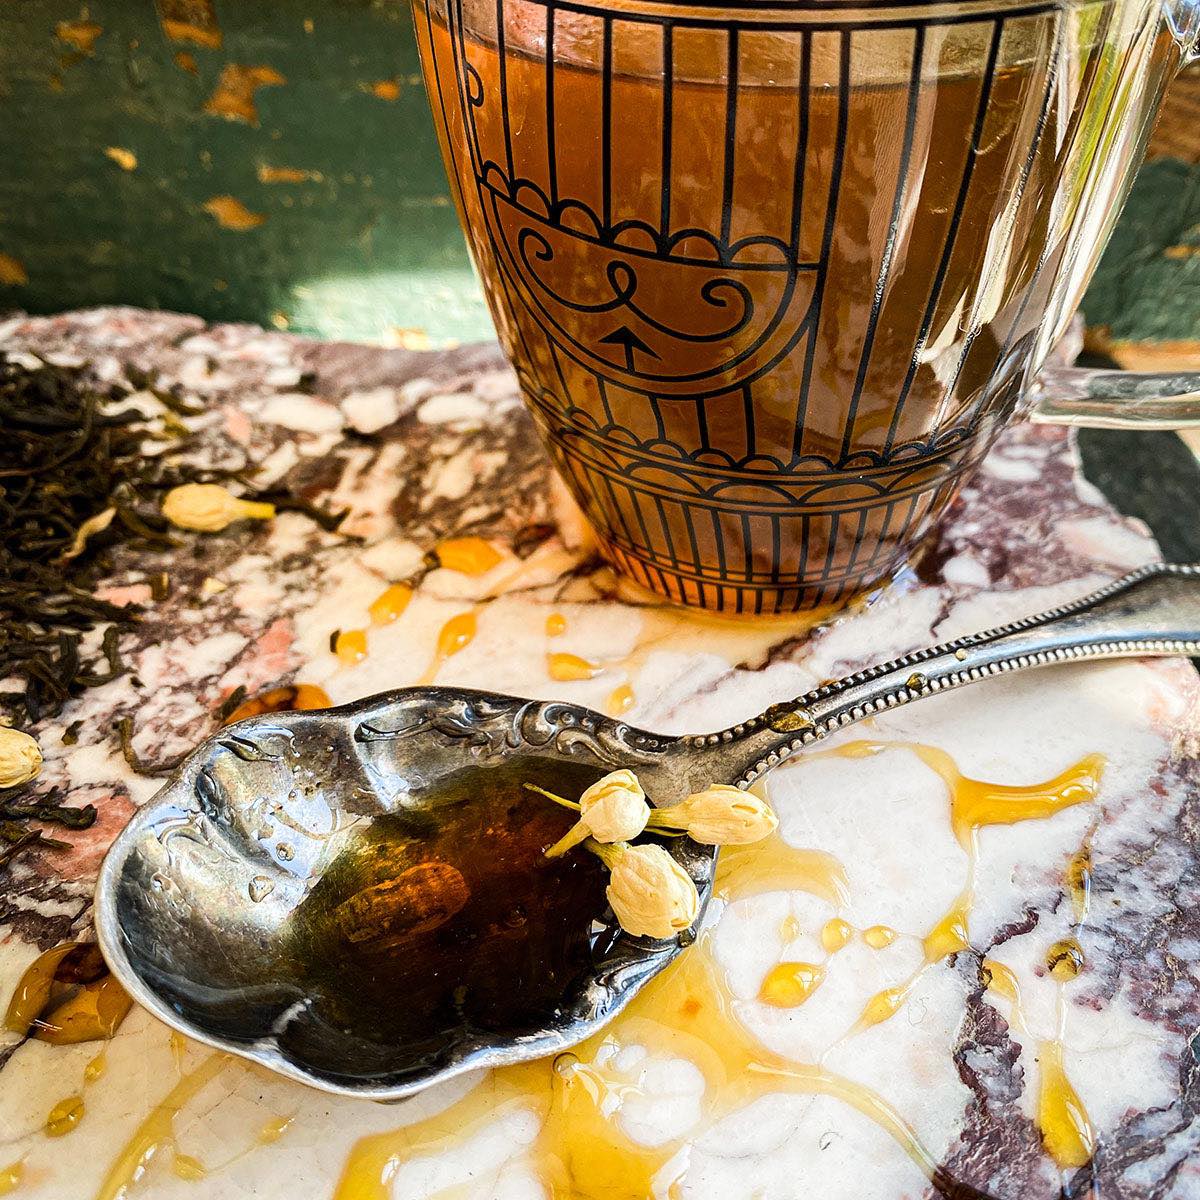 A cup of brewed Jasmine Green Tea is in the background. A spoon with honey is in the foreground.